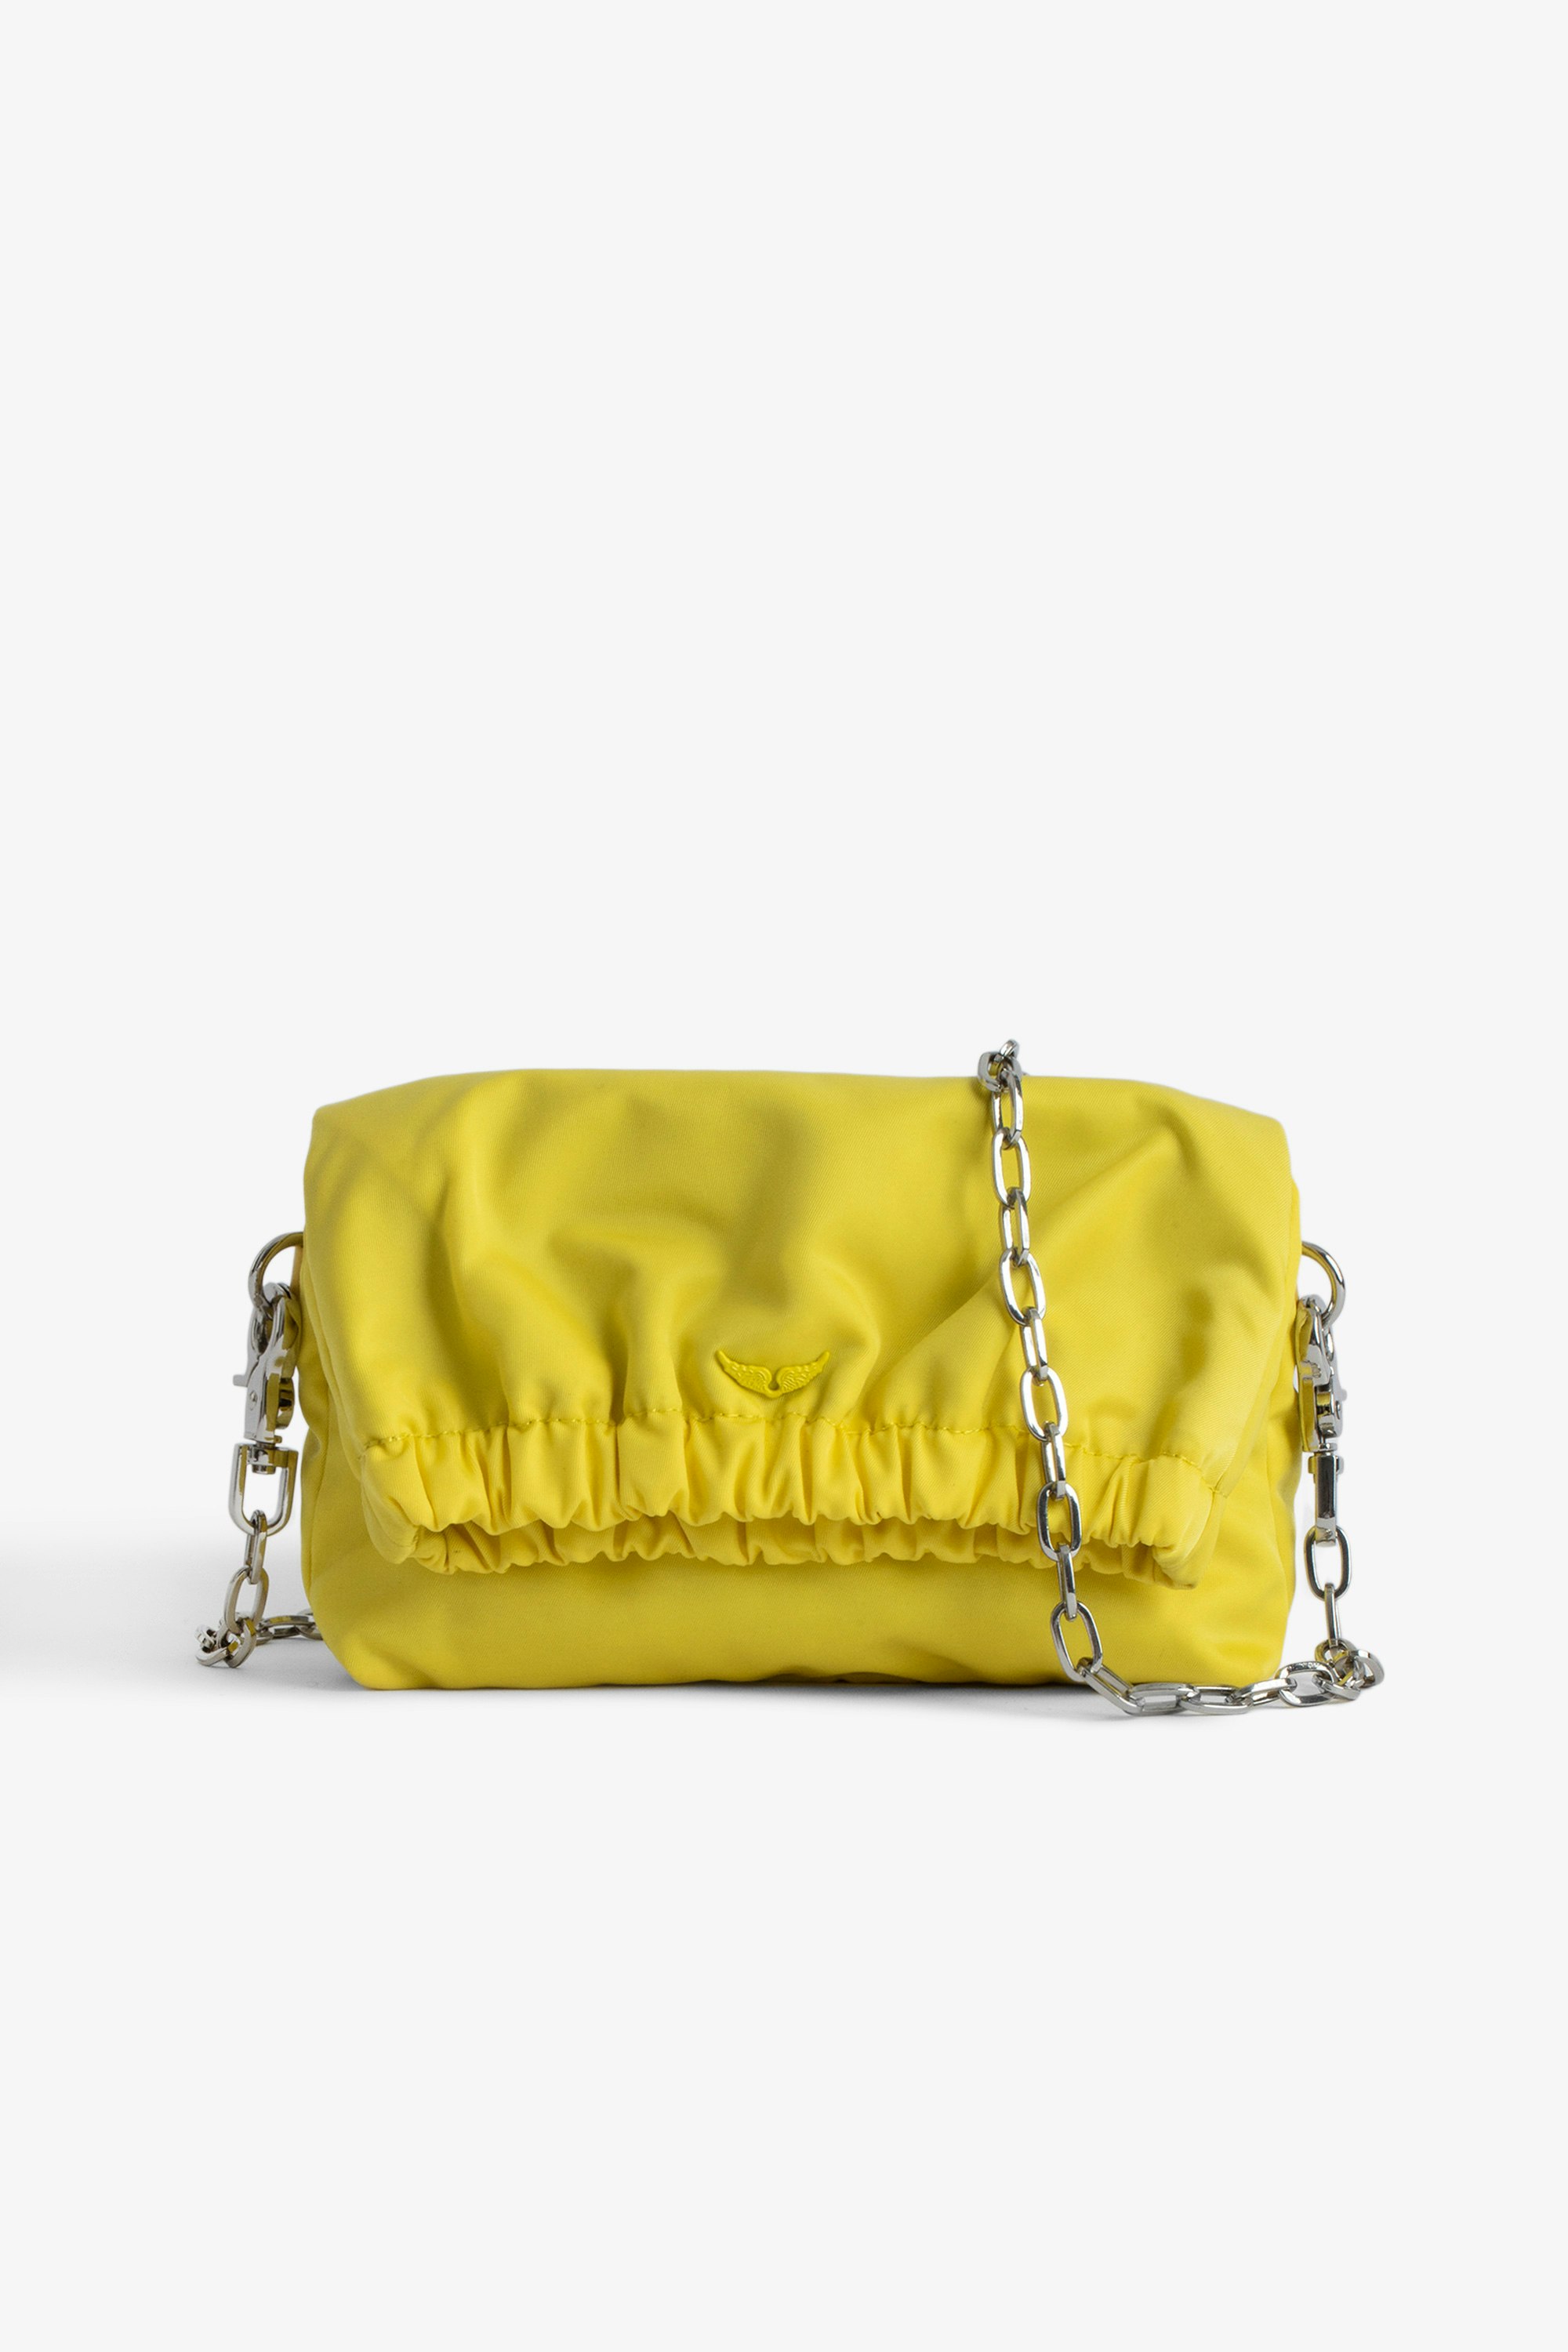 Rockyssime XS Bag Women’s small clutch bag in yellow nylon with metal chain